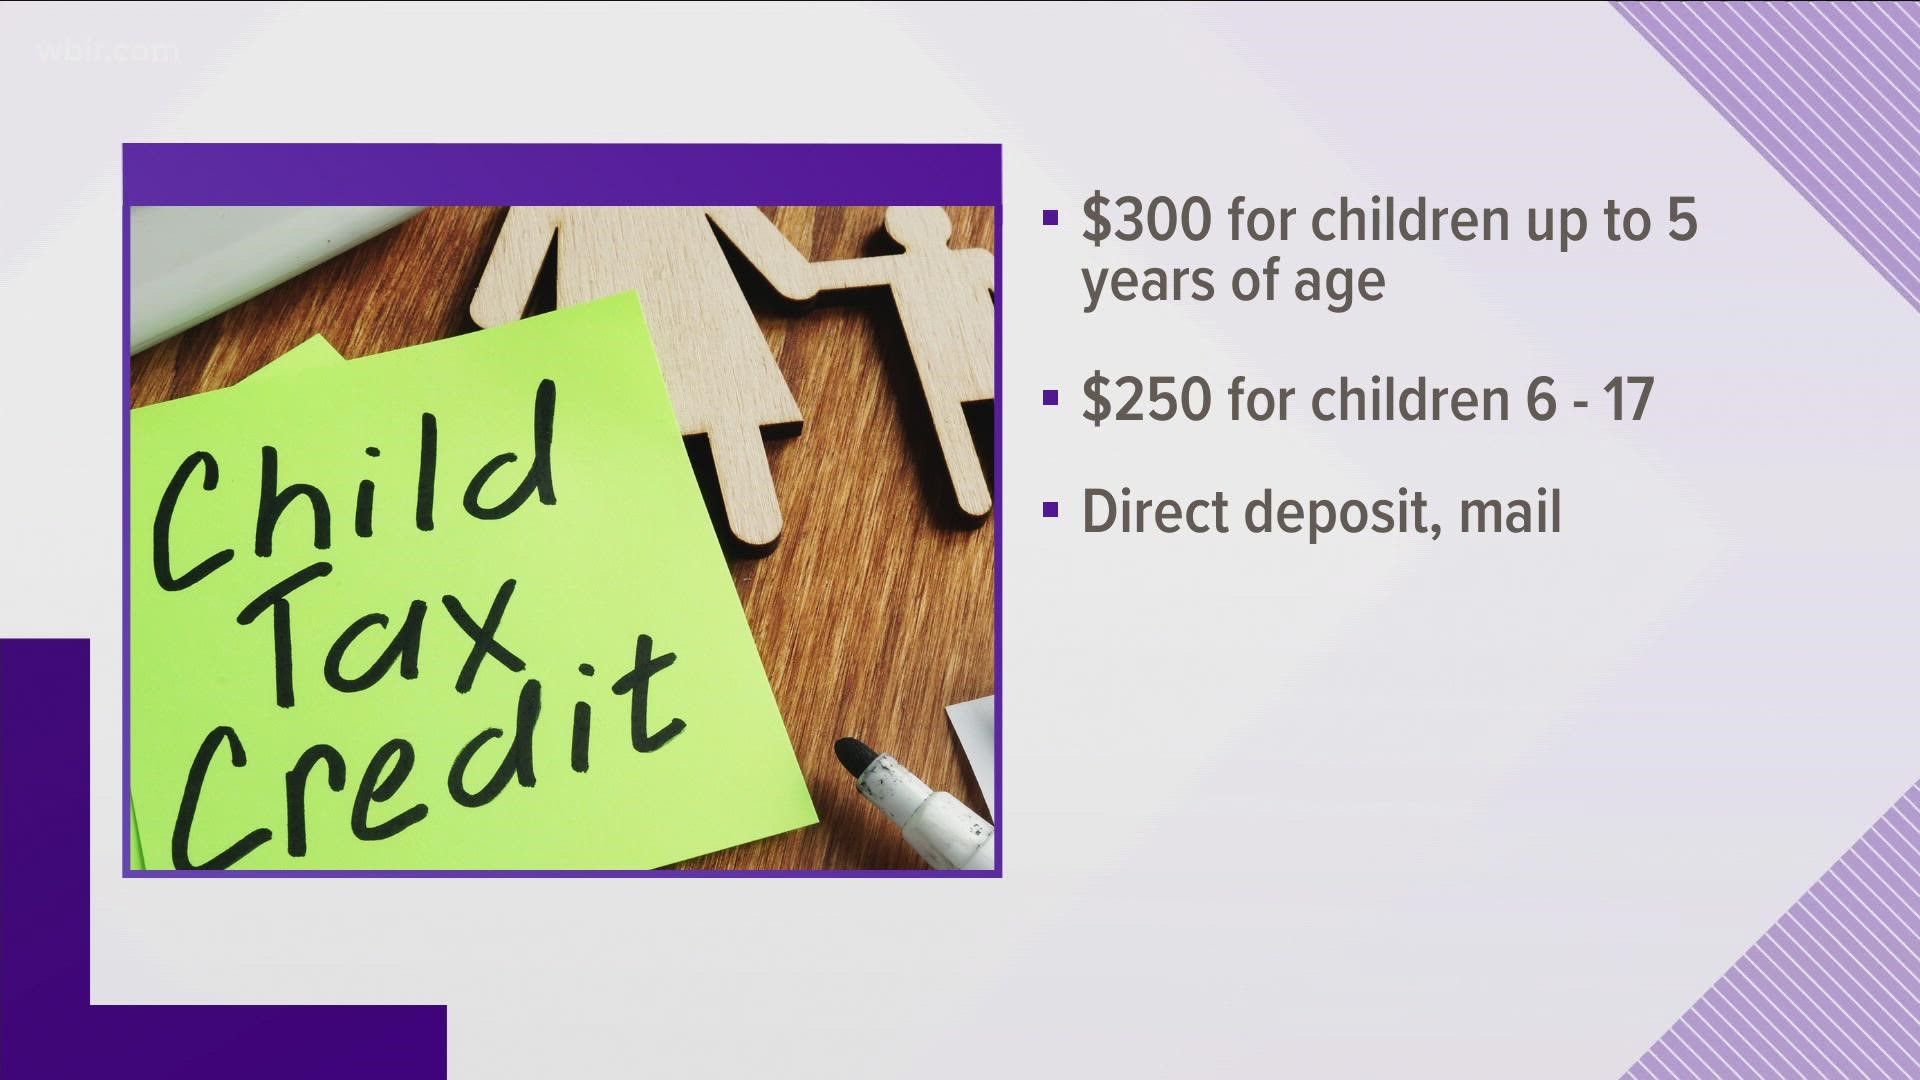 Most eligible parents can expect to receive $300 for children up to 5 years old and $250 for children ages 6 to 17.